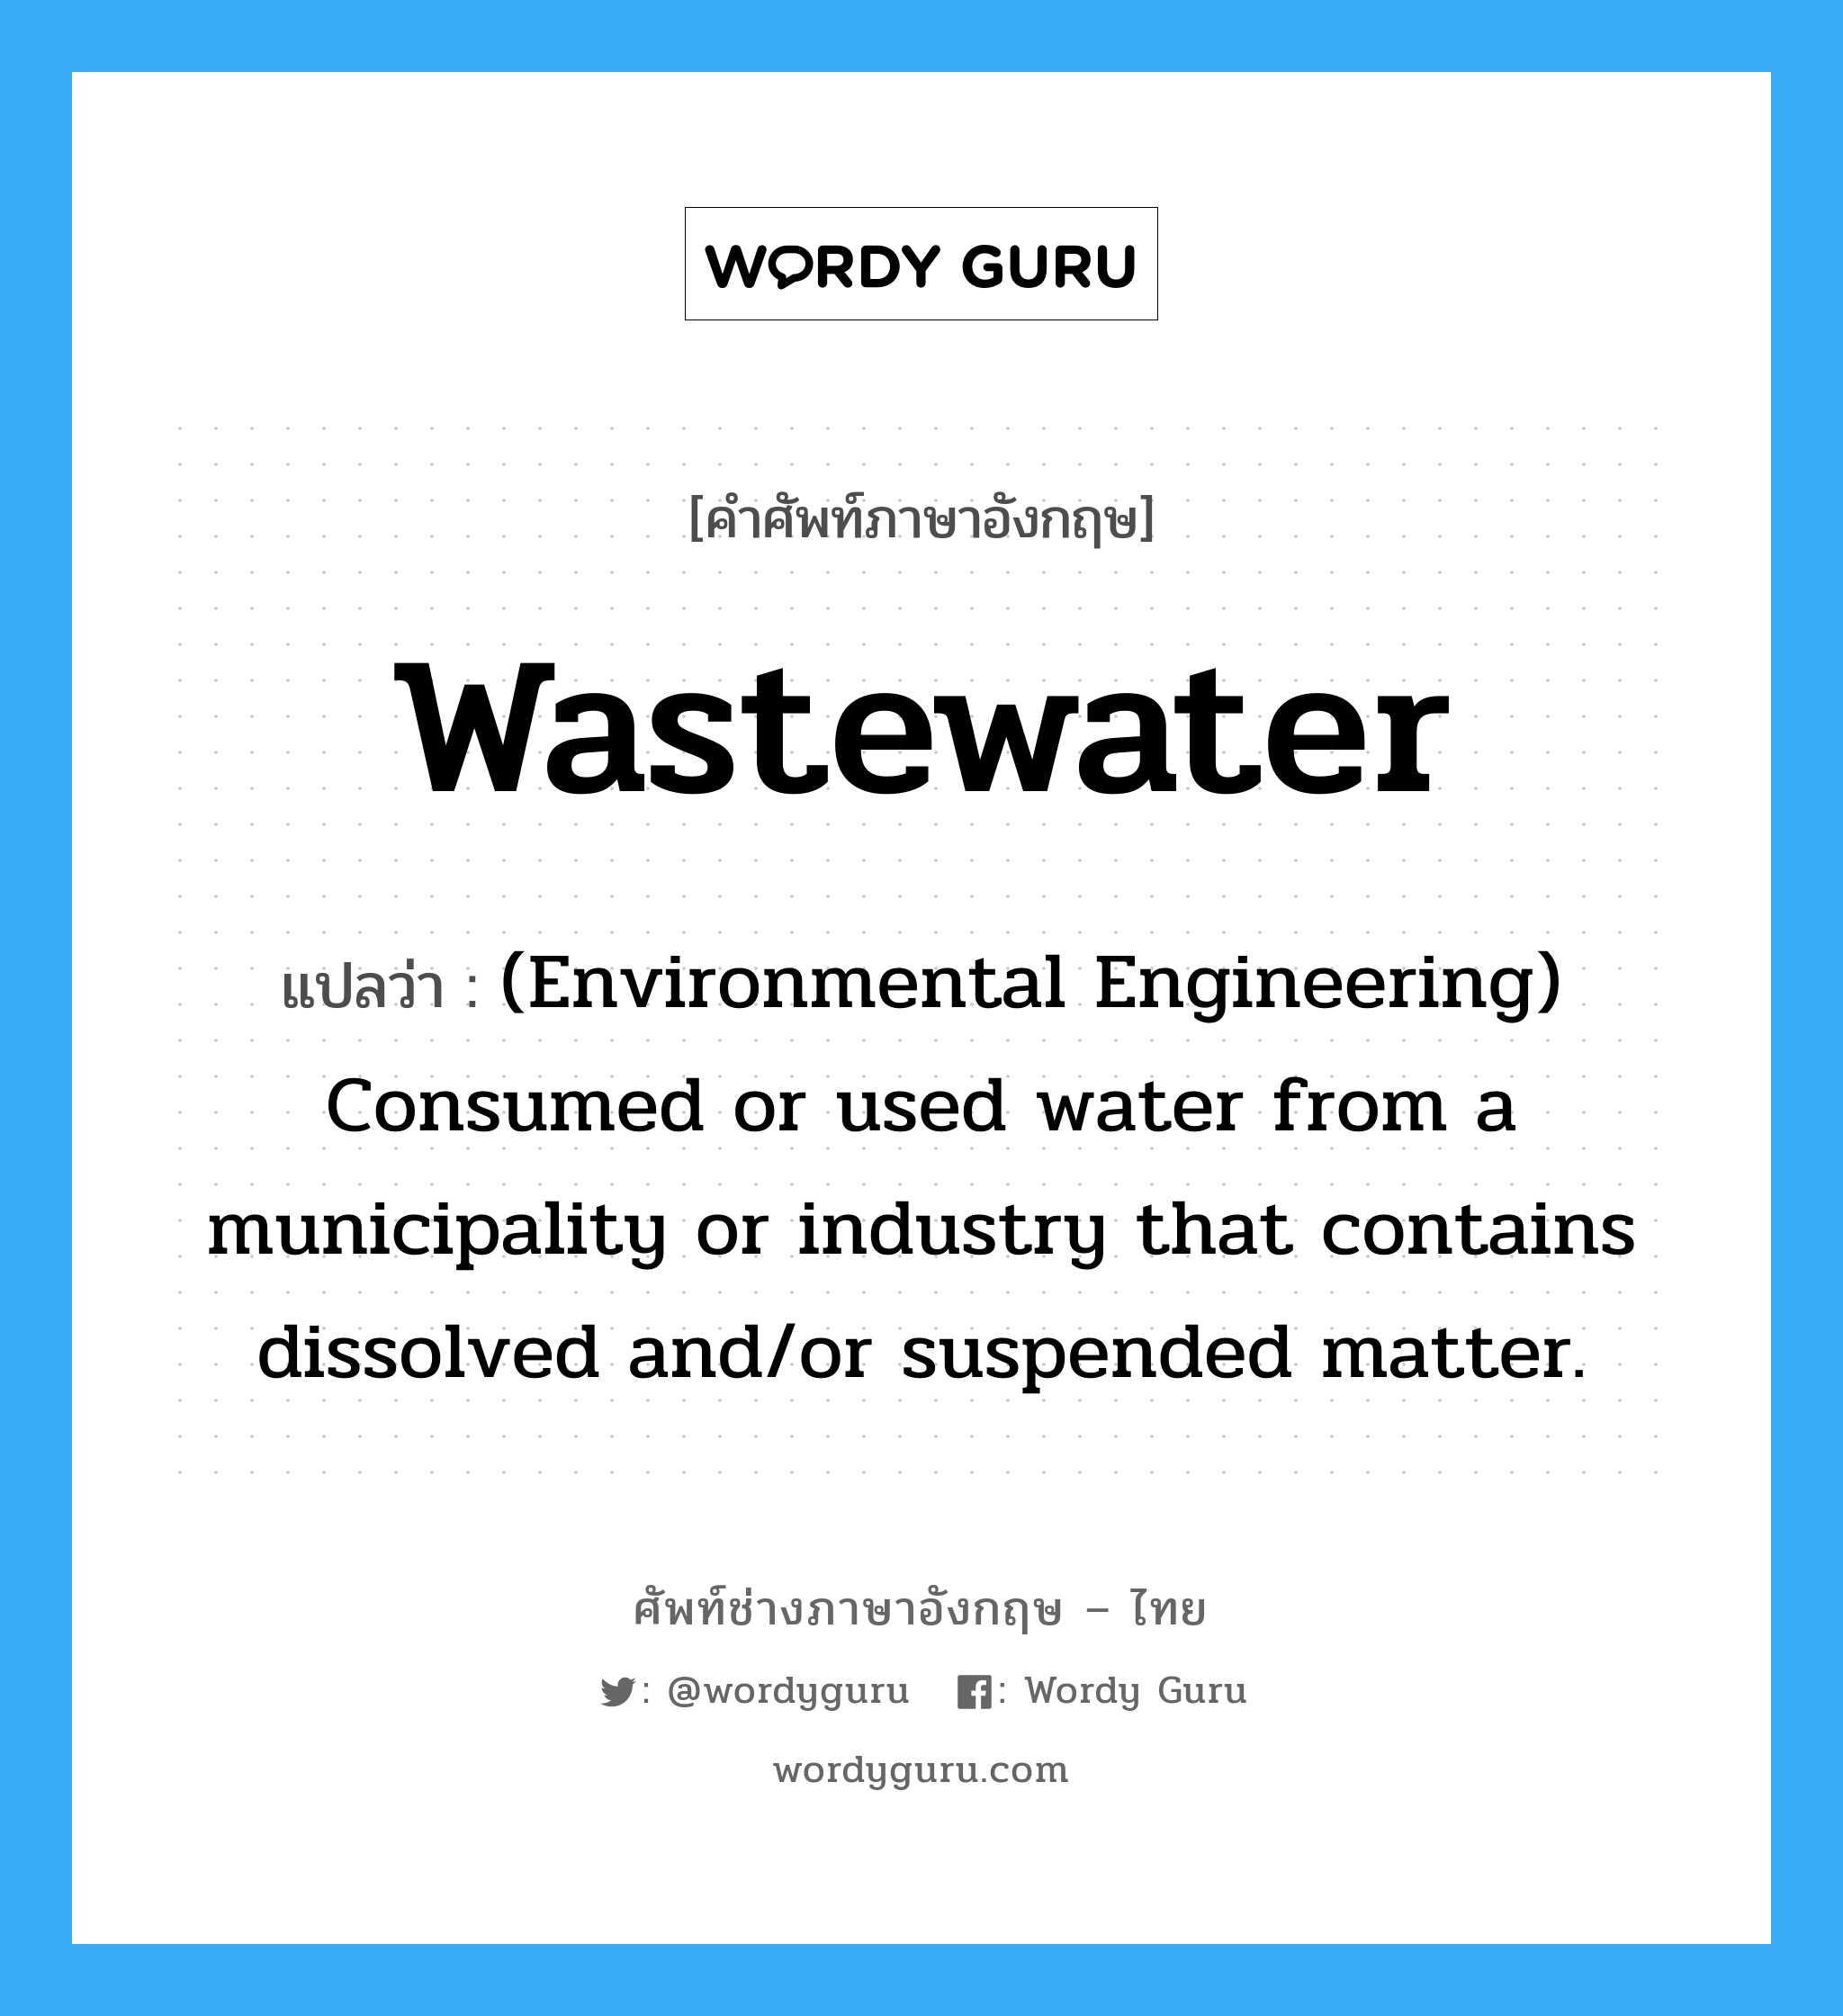 Wastewater แปลว่า?, คำศัพท์ช่างภาษาอังกฤษ - ไทย Wastewater คำศัพท์ภาษาอังกฤษ Wastewater แปลว่า (Environmental Engineering) Consumed or used water from a municipality or industry that contains dissolved and/or suspended matter.